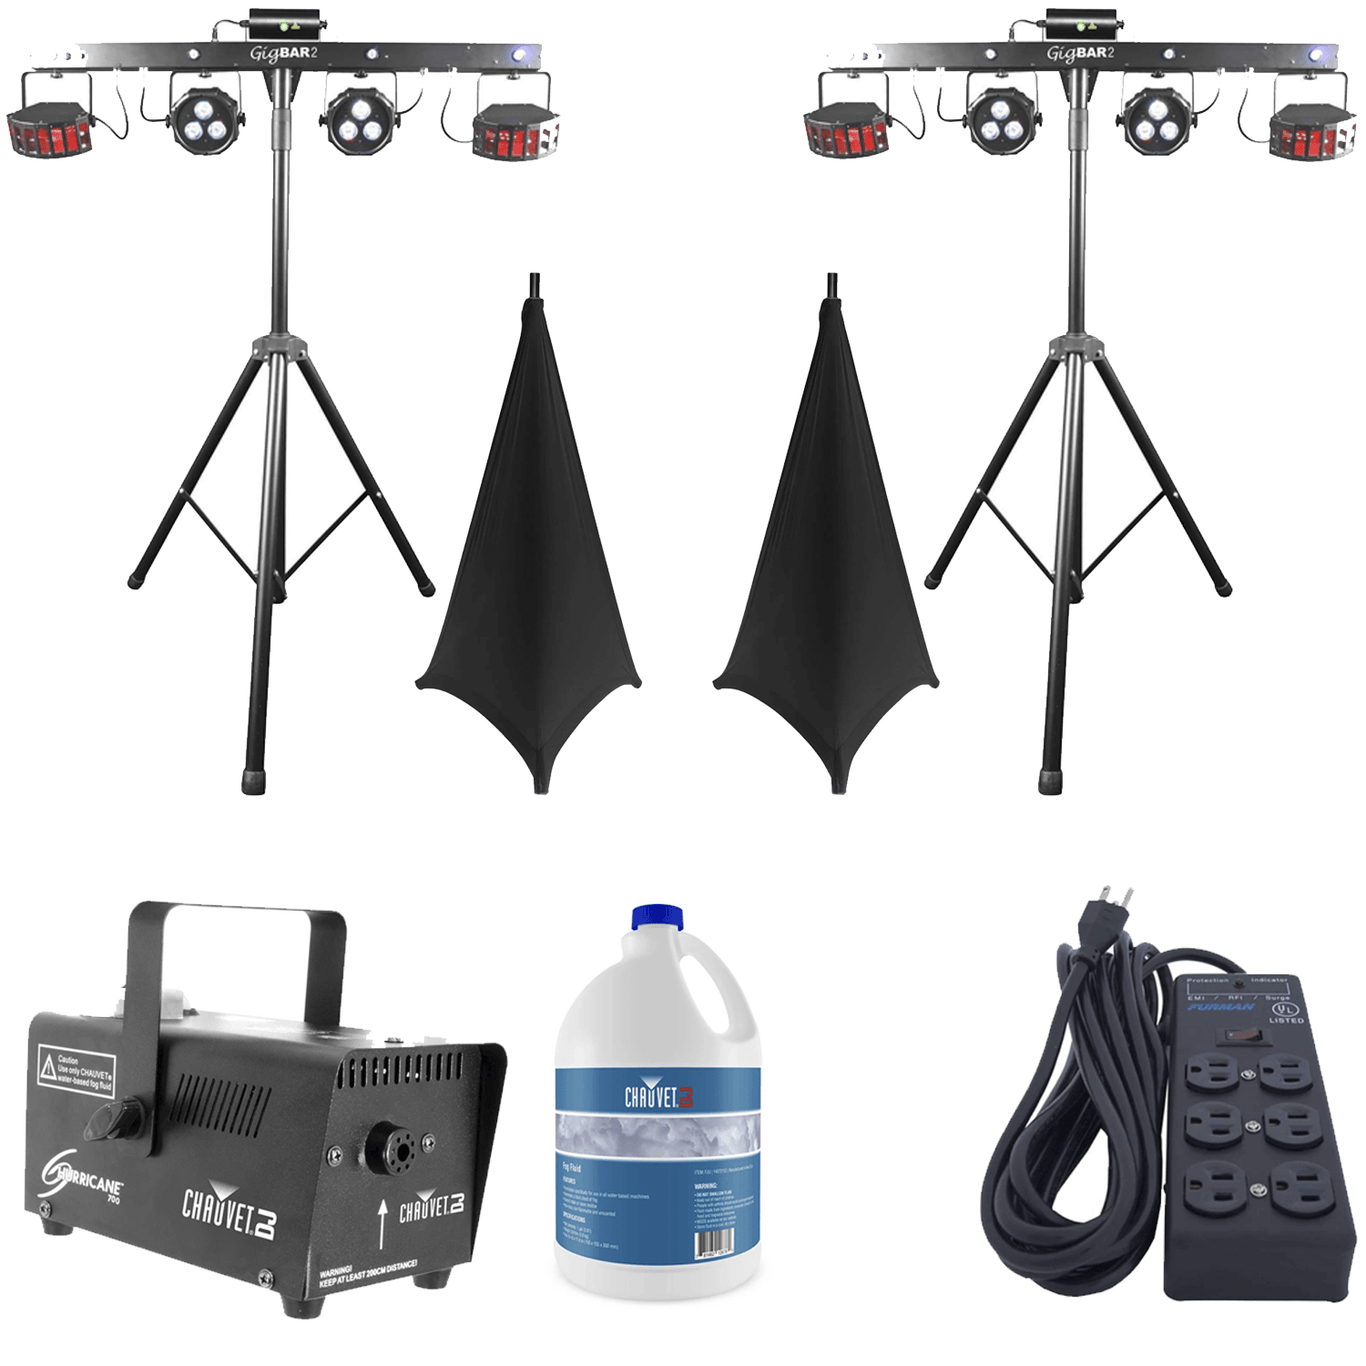 Chauvet Gig Bar 2 System Pack With